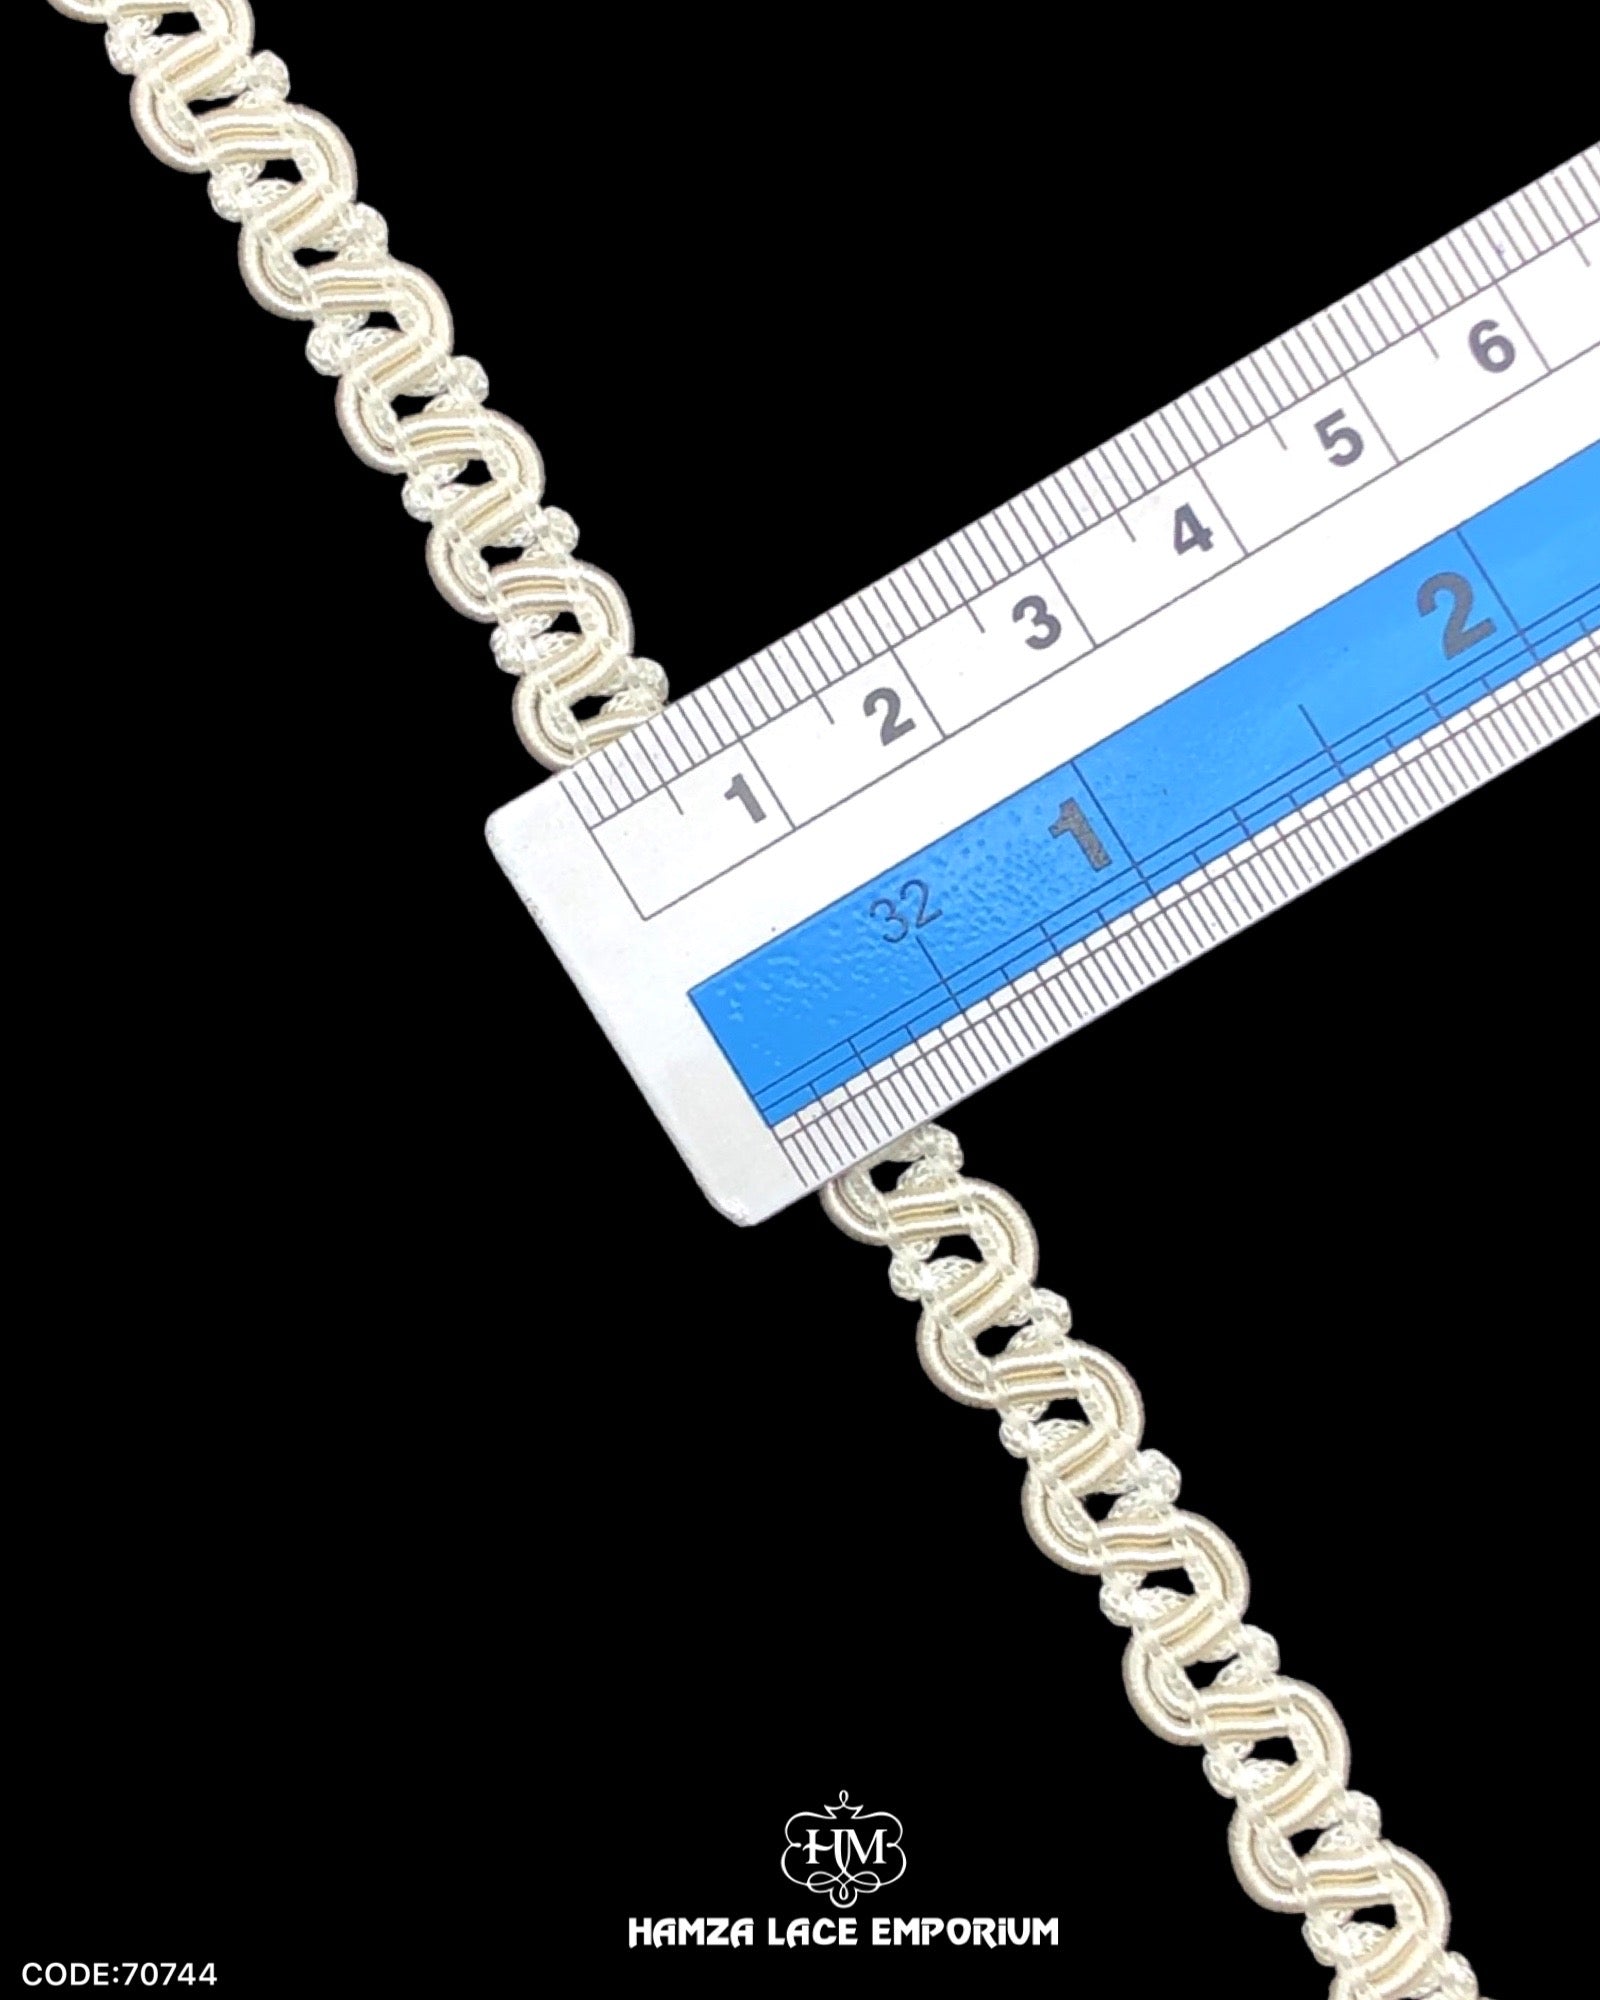 Size of the 'Zig Zag Polyester Lace 70744' is displayed with the help of a ruler